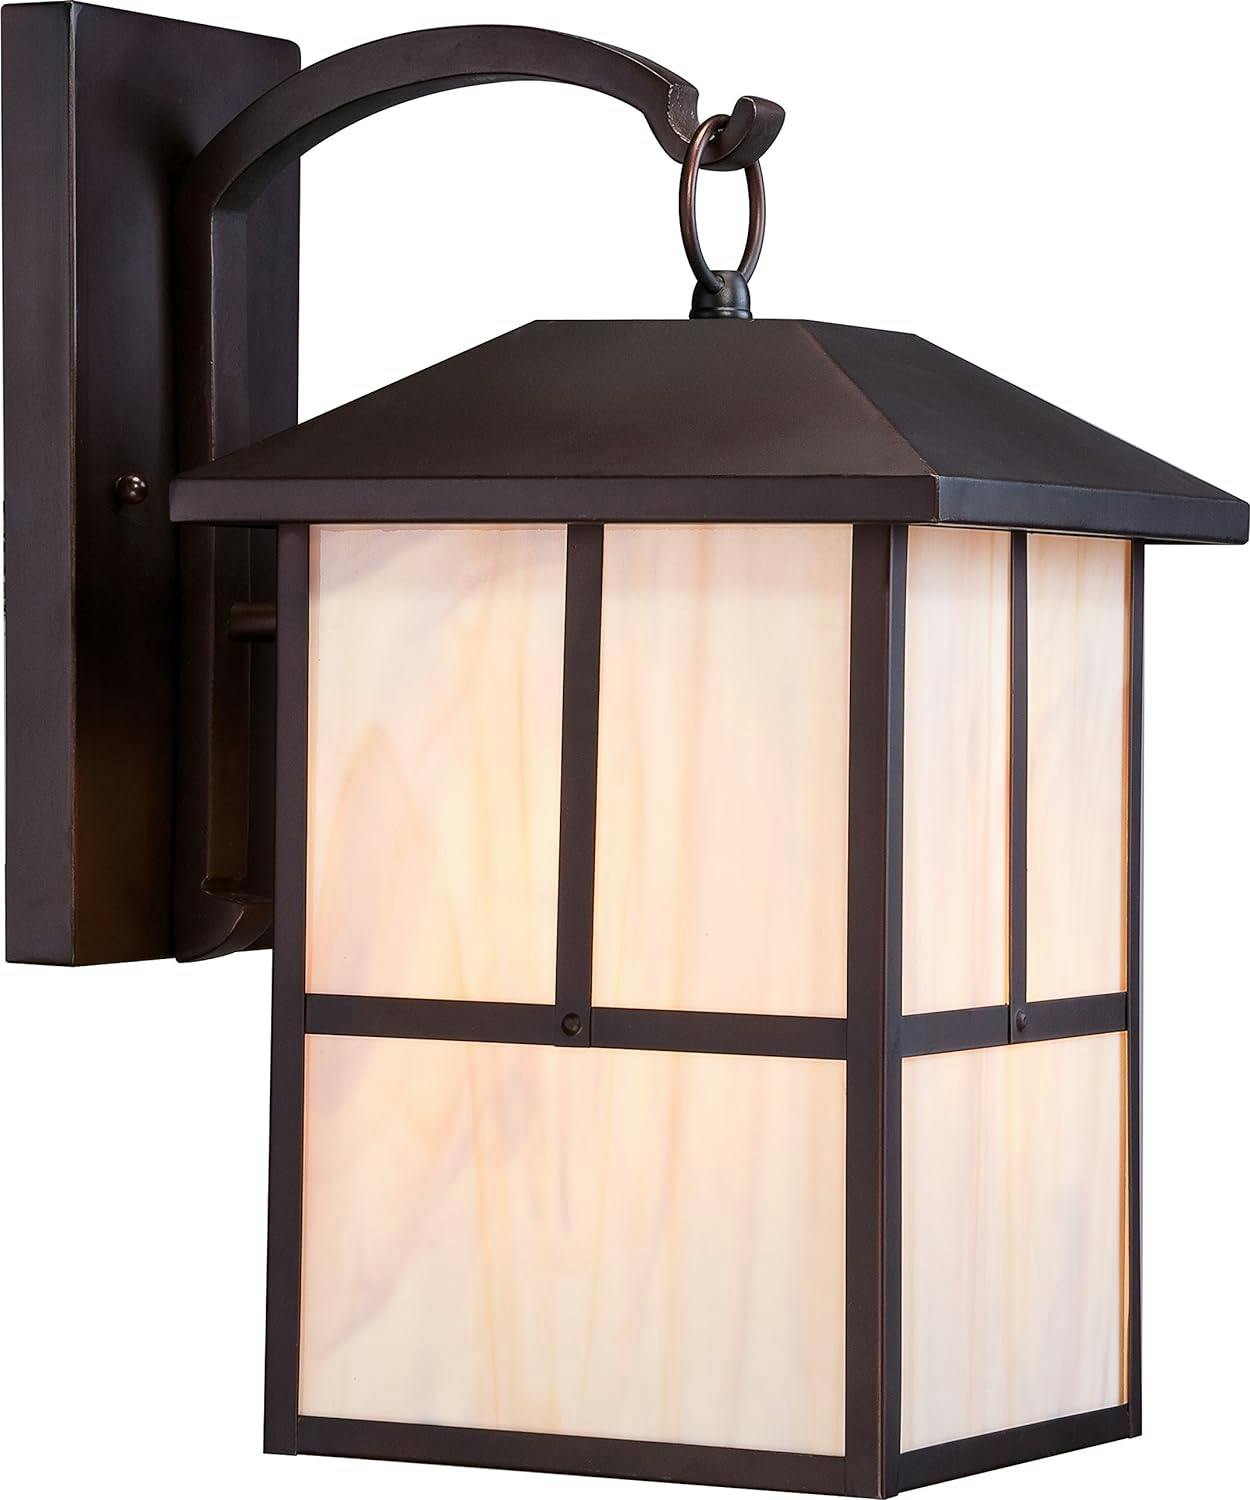 Claret Bronze 10" Outdoor Wall Lantern with Honey Stained Glass